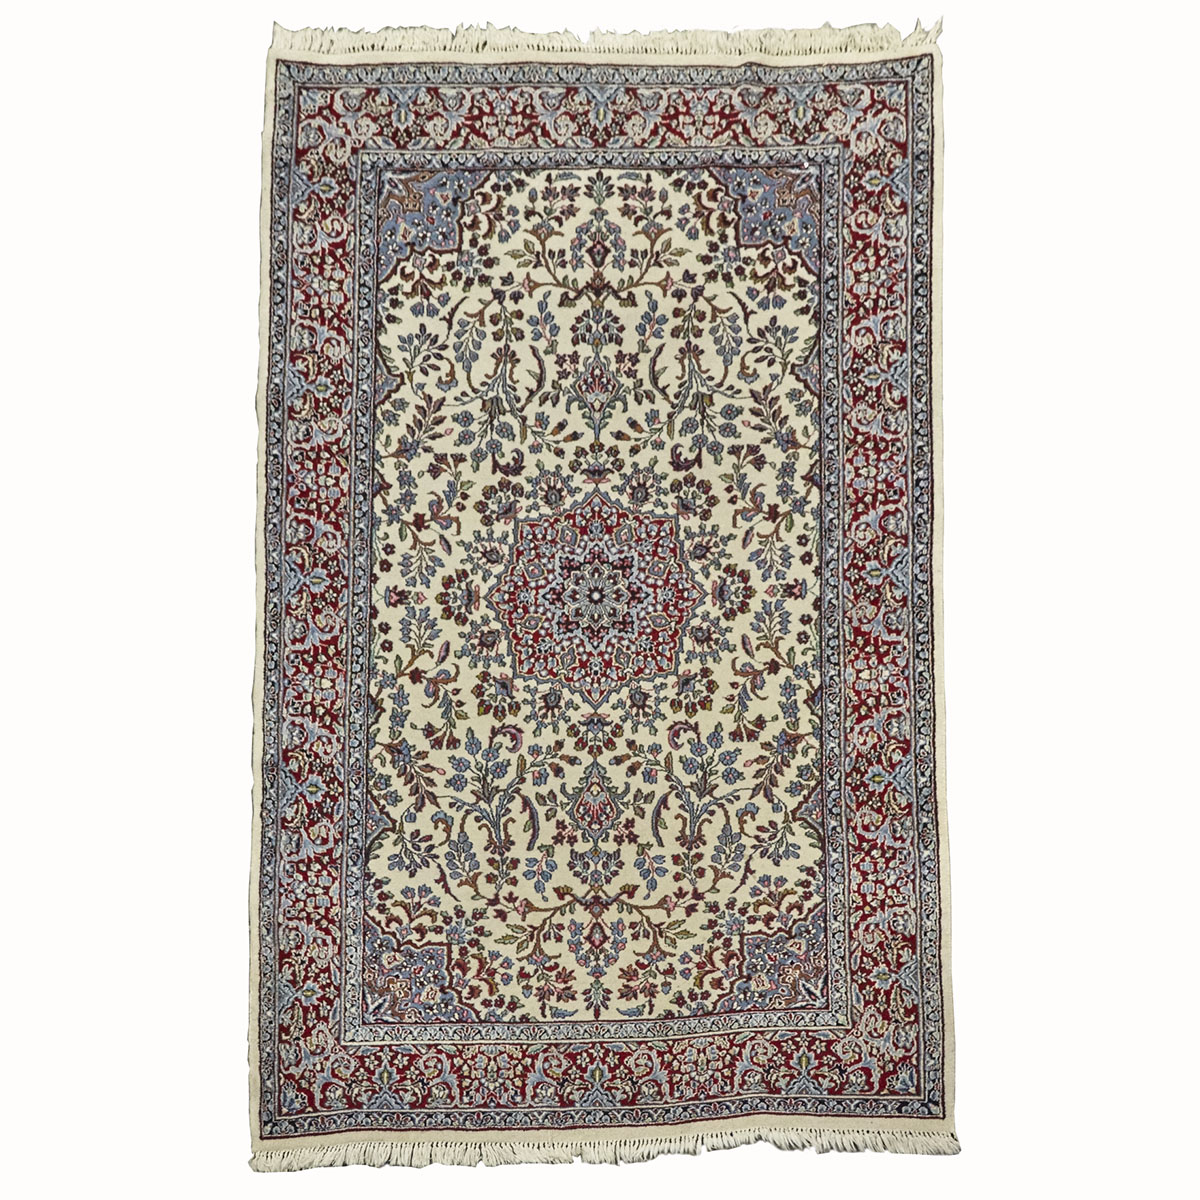 Ispahan Rug, middle 20th century, Persian